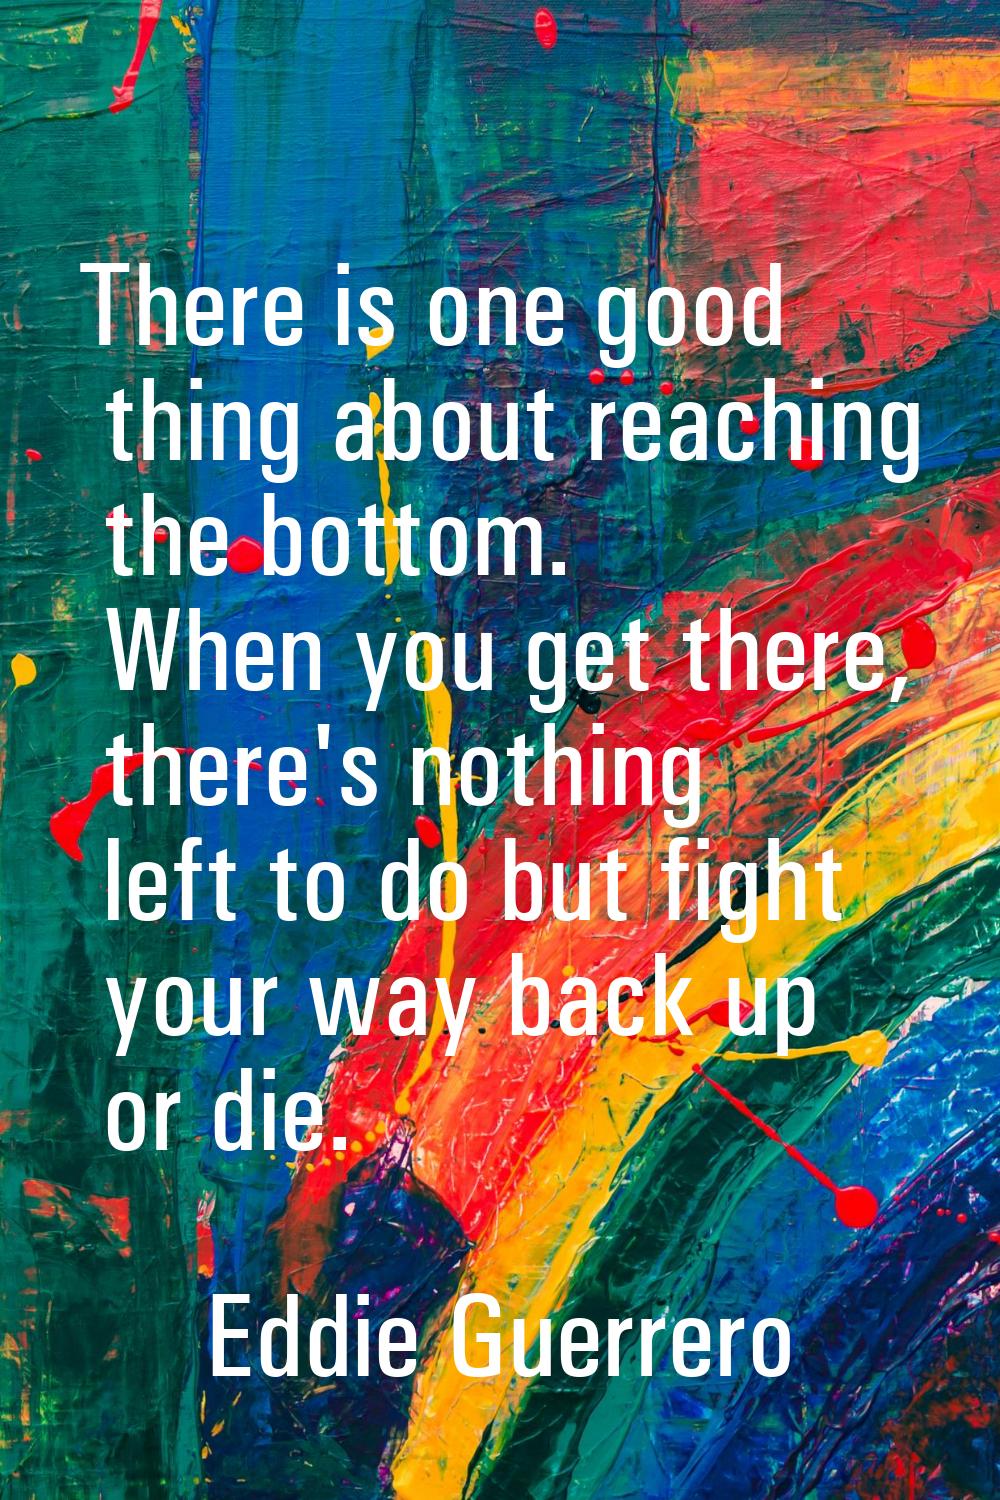 There is one good thing about reaching the bottom. When you get there, there's nothing left to do b